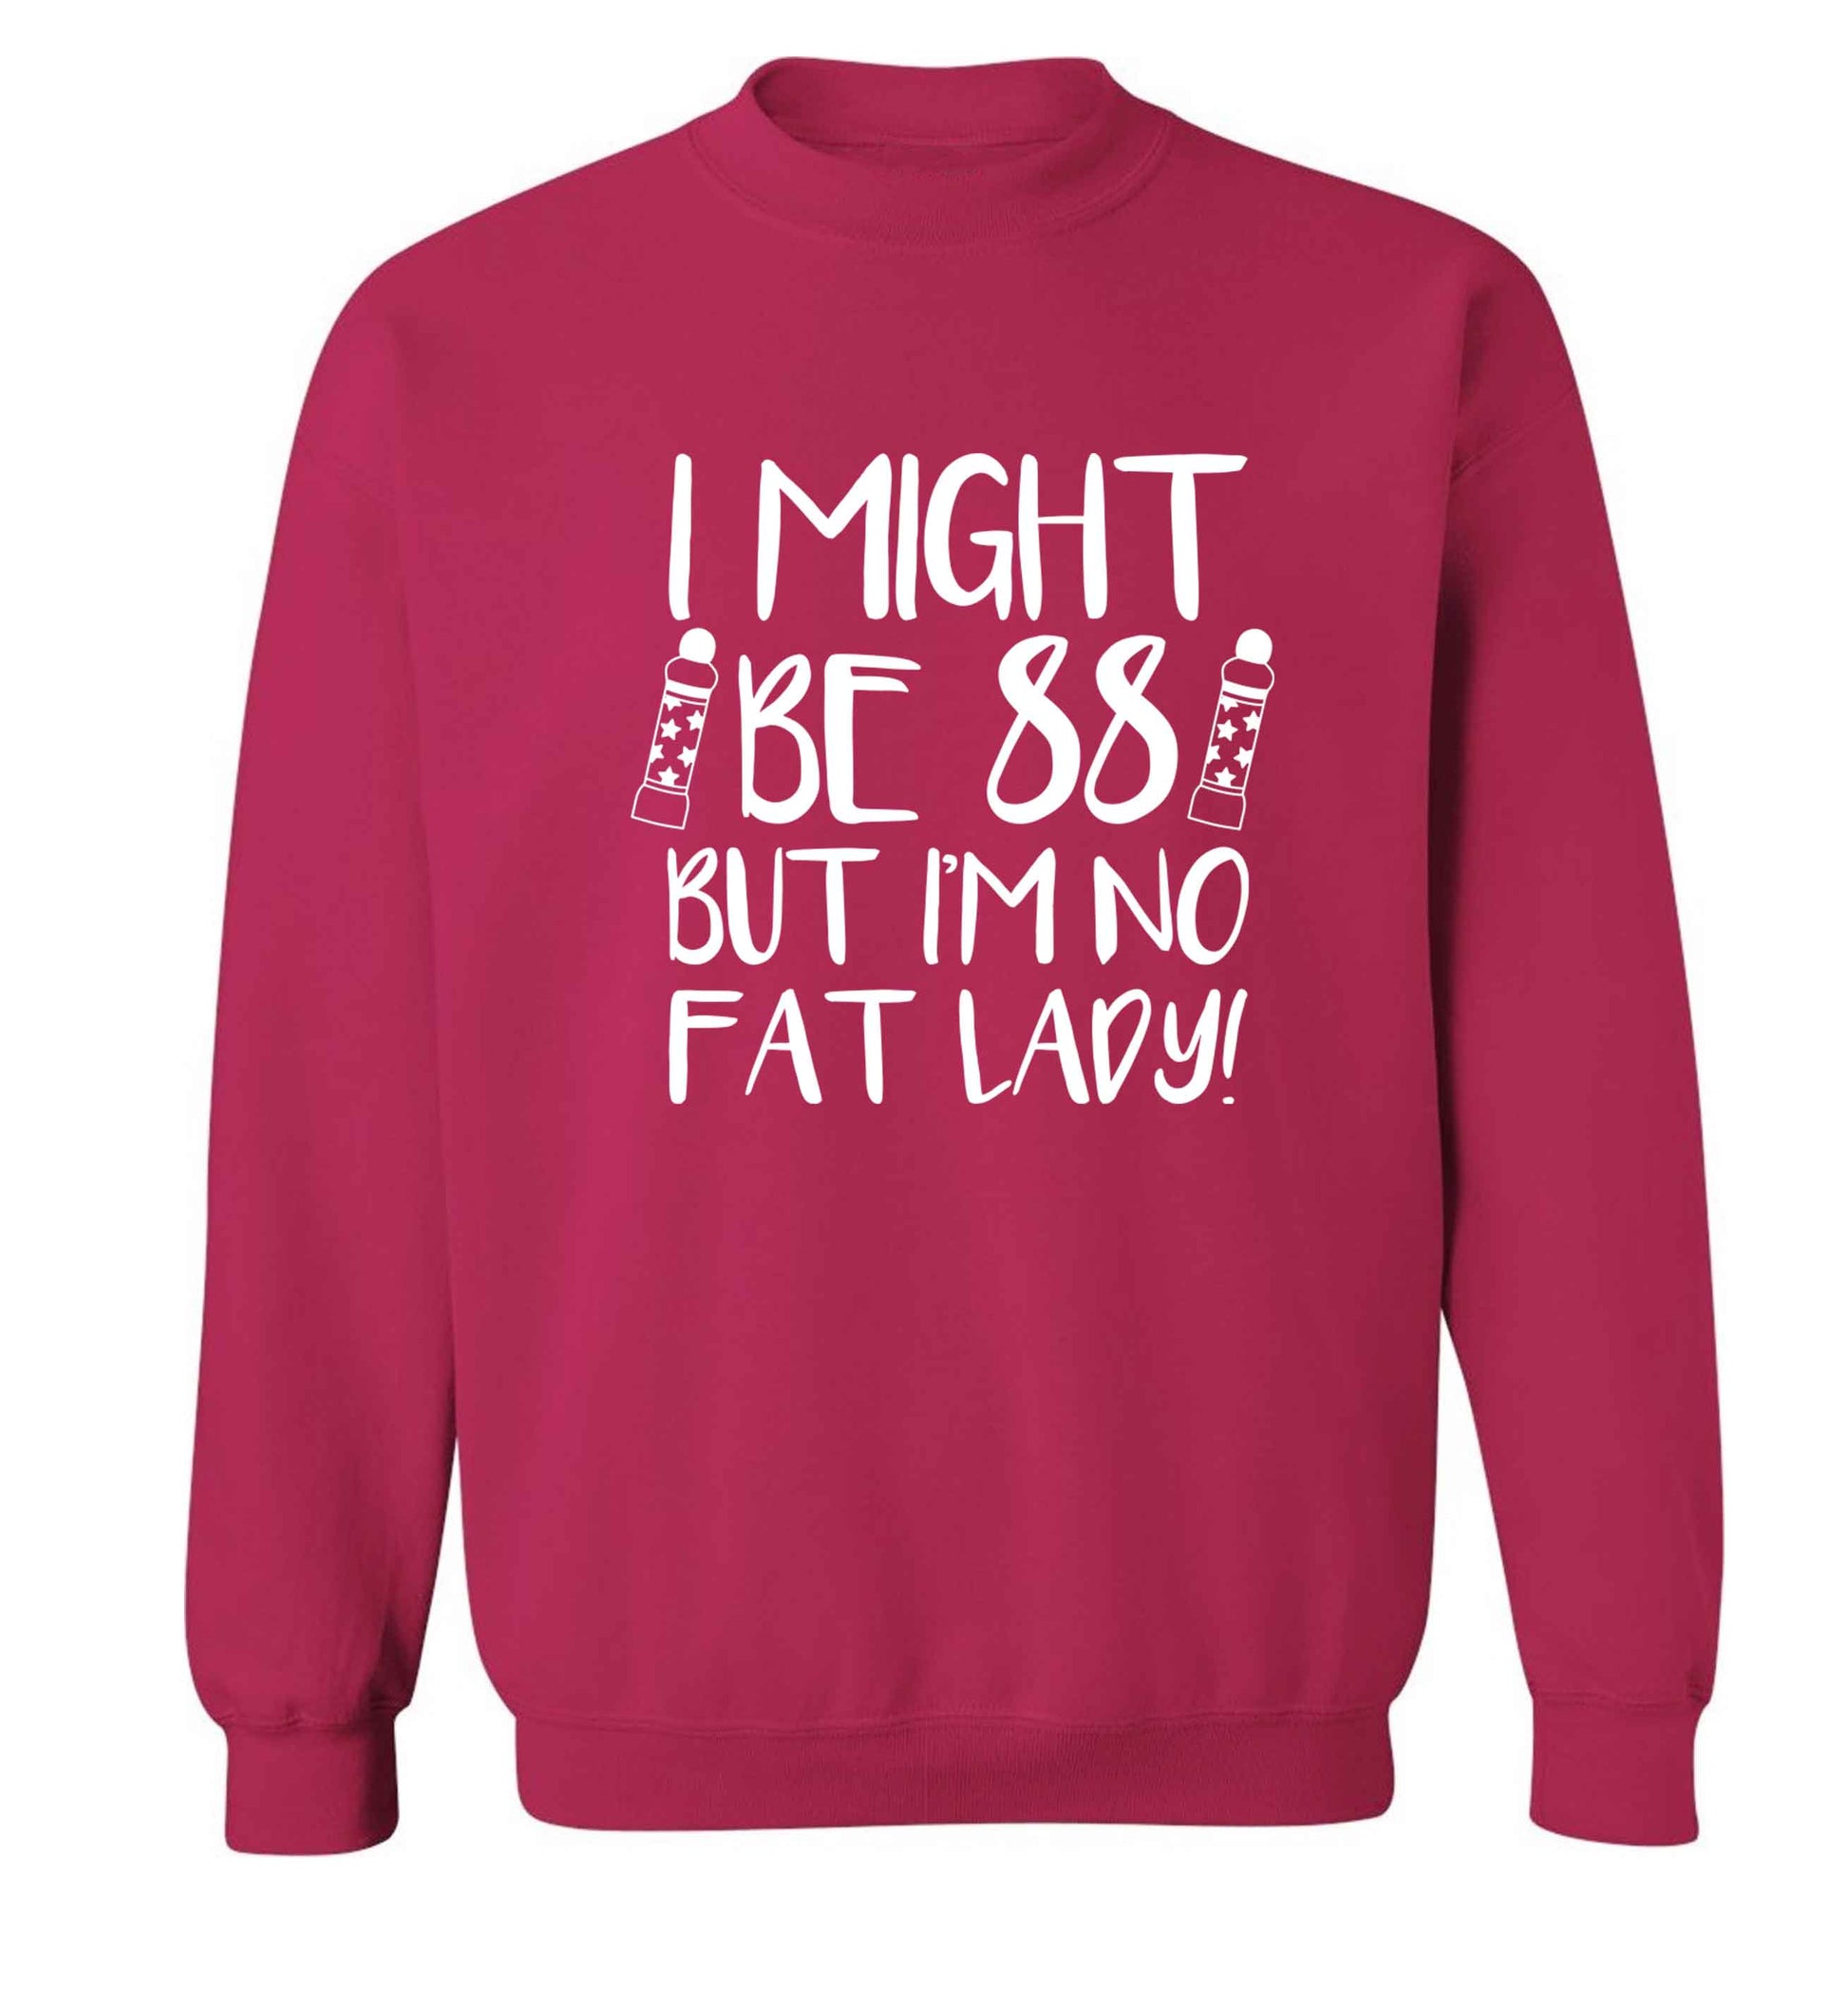 I might be 88 but I'm no fat lady Adult's unisex pink Sweater 2XL